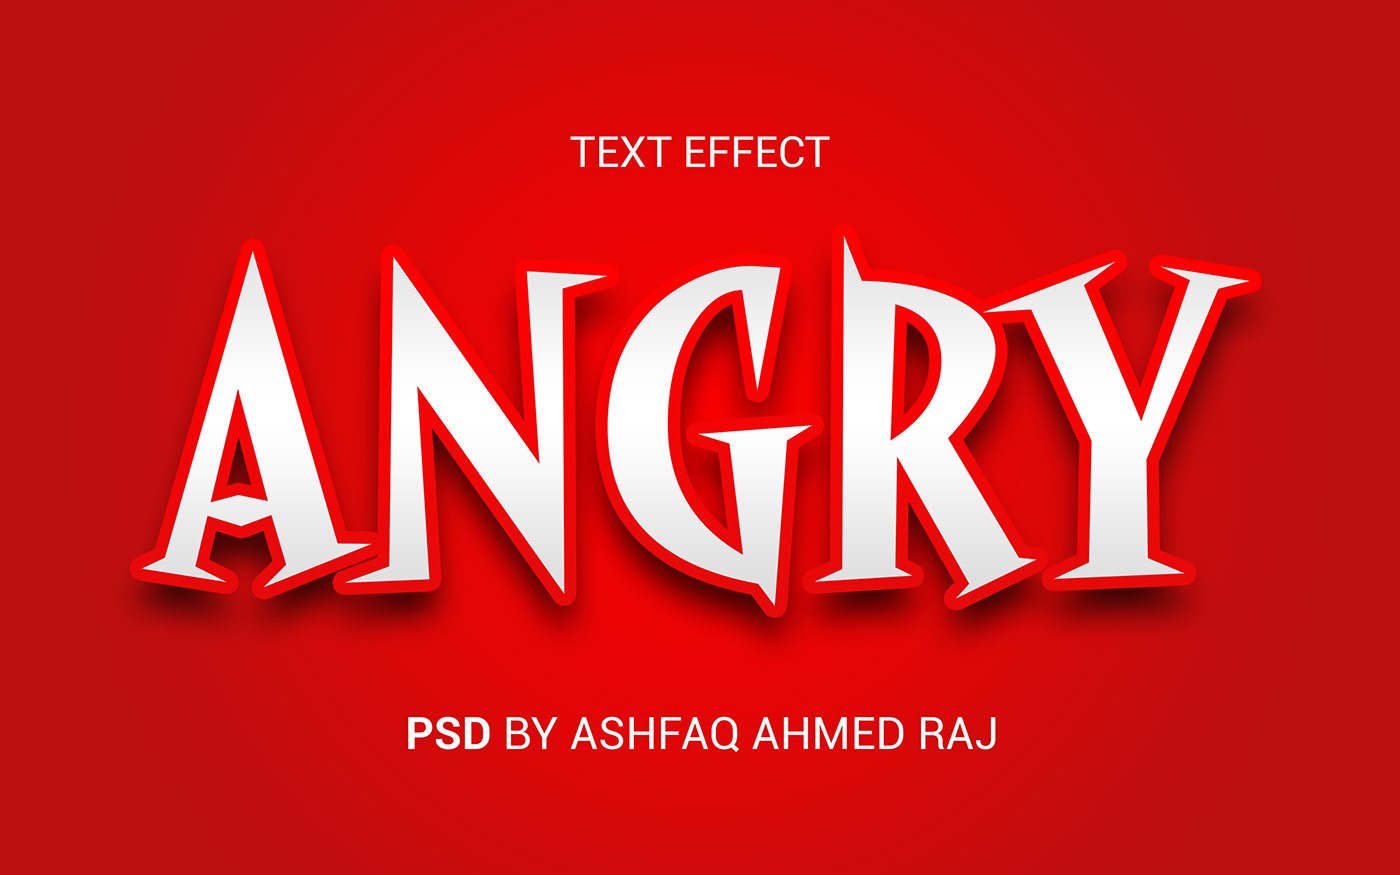 angry text effect downloadpdf effective text effect text effect design text effect photoshop text effects psd